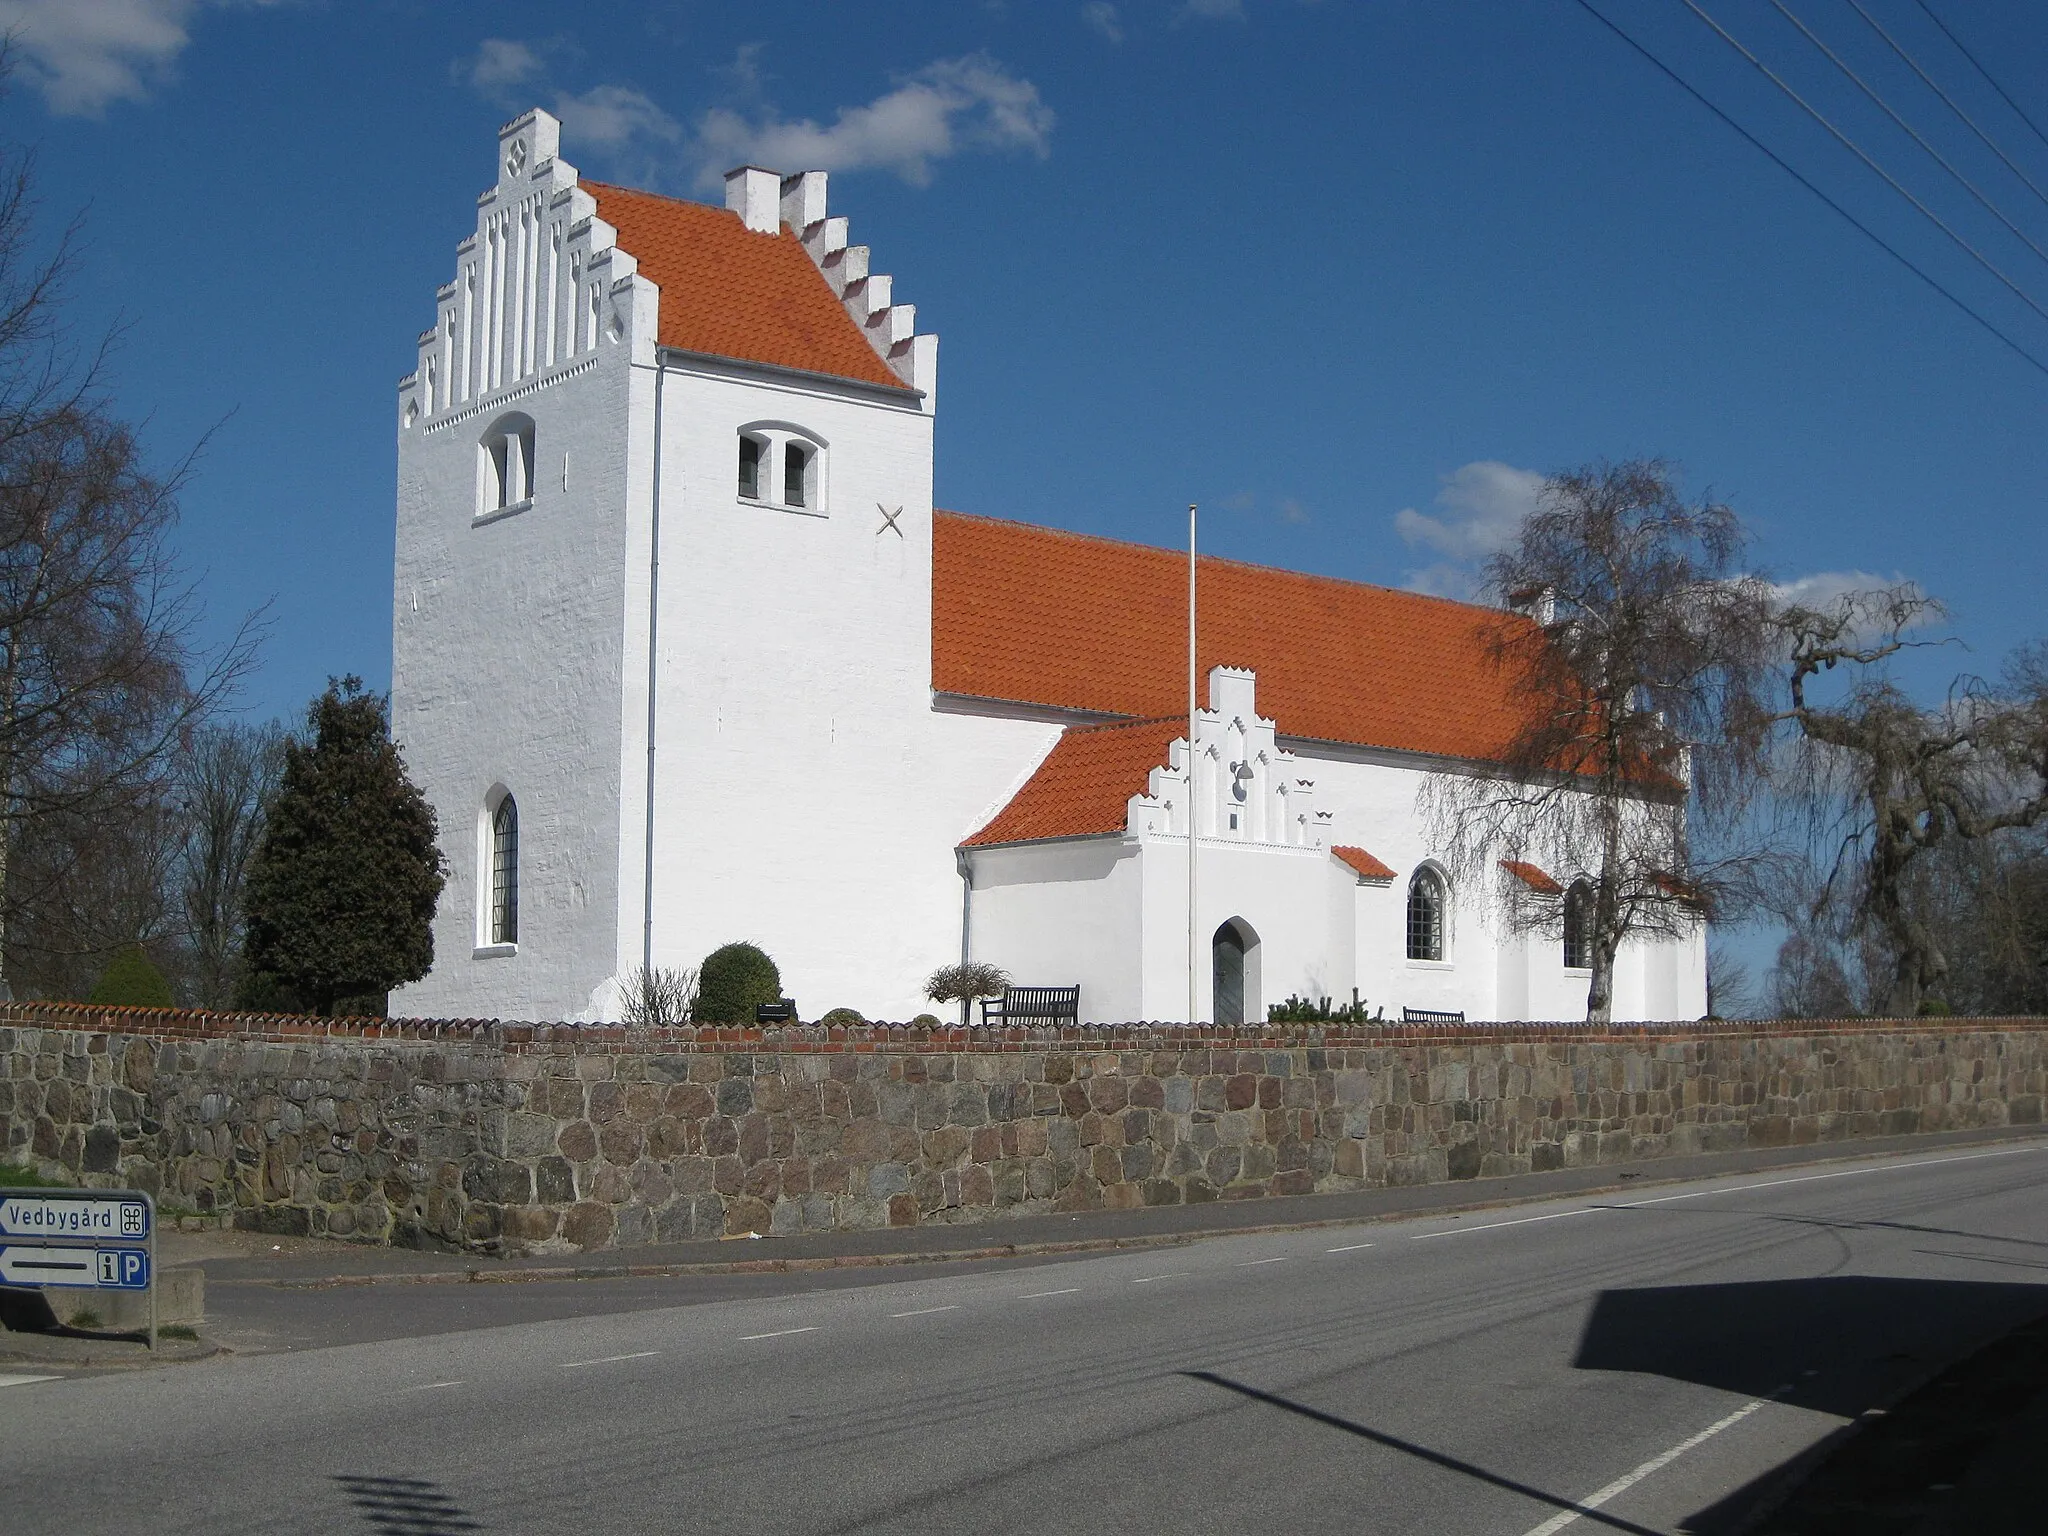 Photo showing: The church "Ruds Vedby Kirke" in the small town Ruds Vedby. The town is located in West Zealand, Denmark.